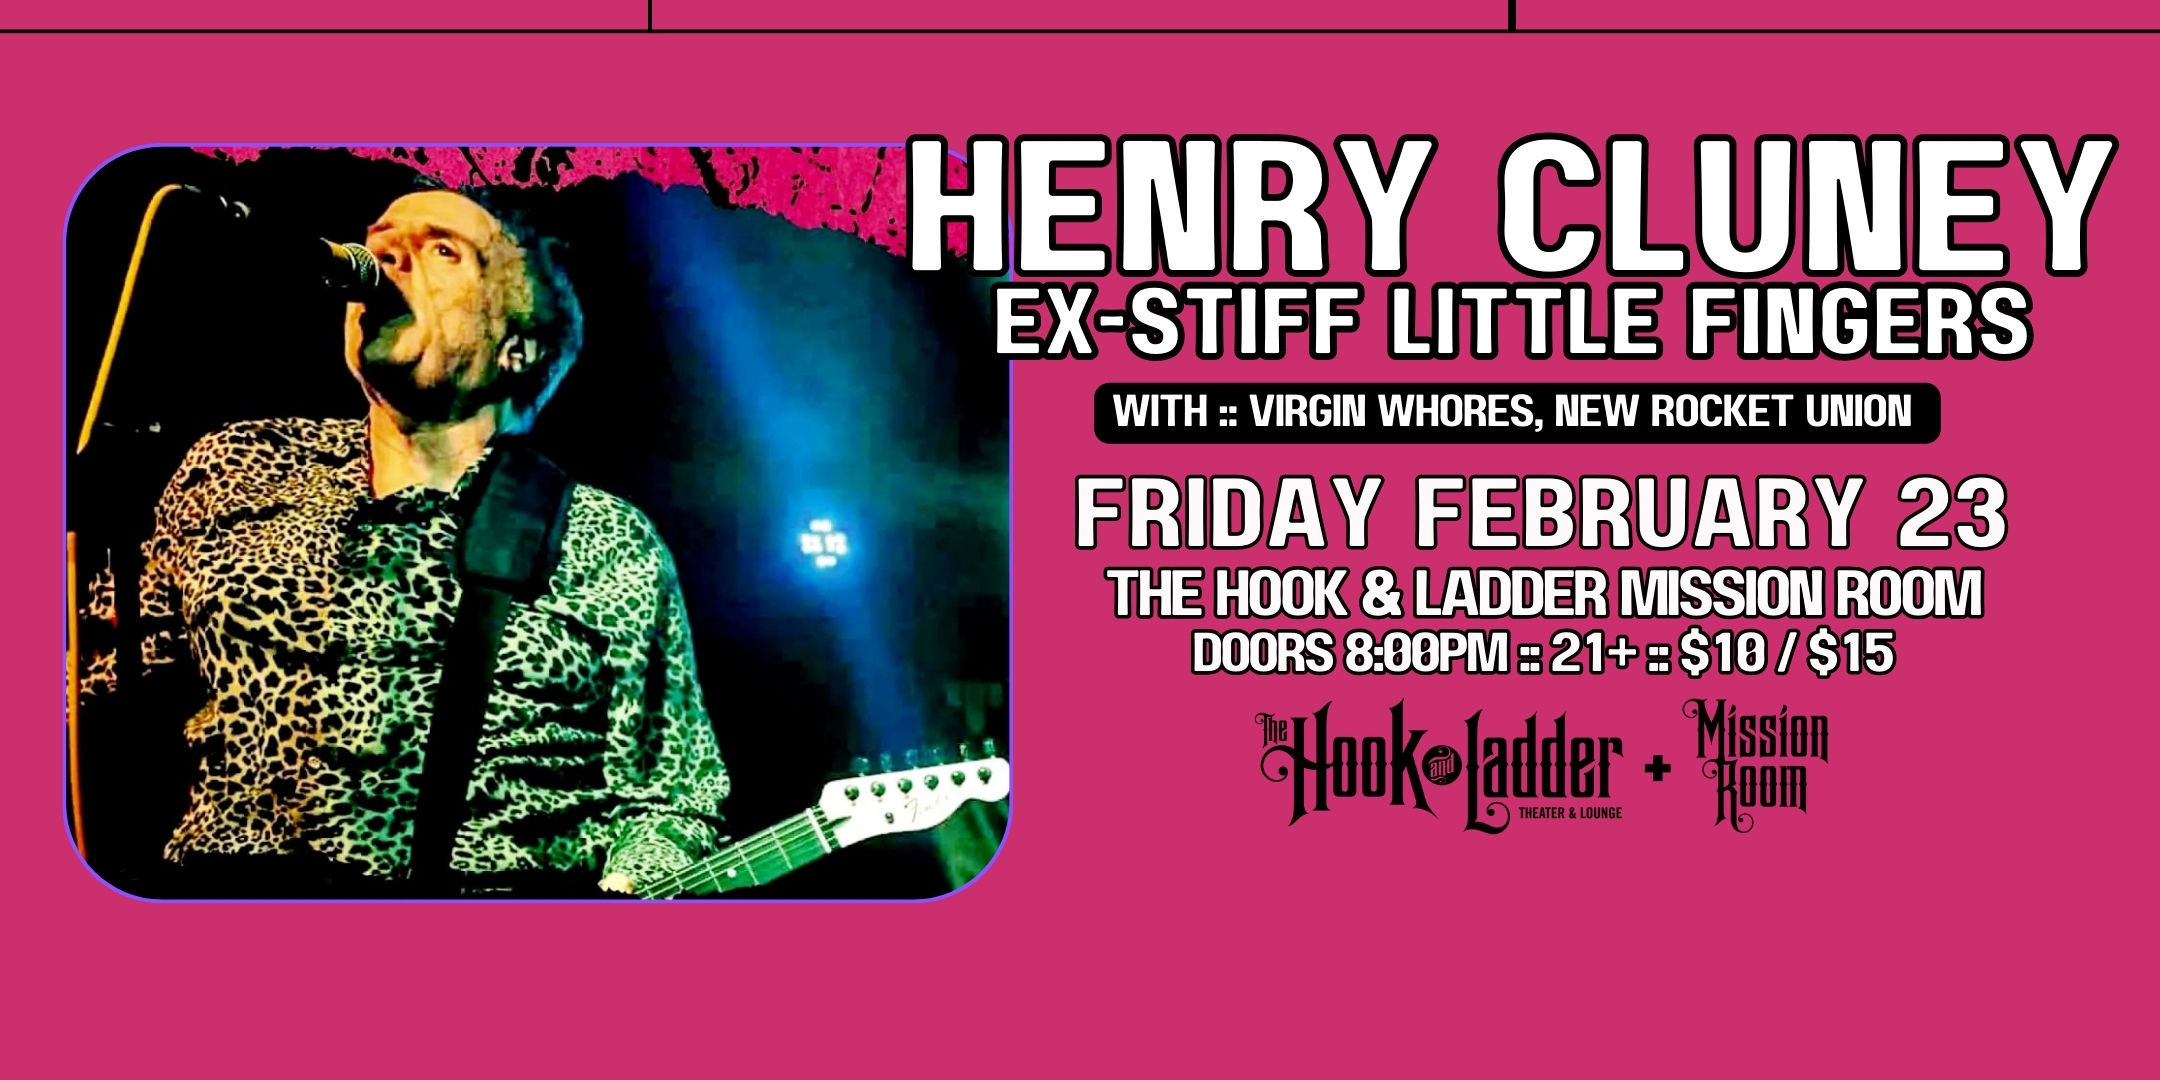 Henry Cluney (ex-Stiff Little Fingers) with Virgin Whores, & New Rocket Union Friday, February 23 The Hook and Ladder Mission Room Doors 8:00pm :: Music 8:30pm :: 21+ General Admission: $10 ADV / $15 DOS